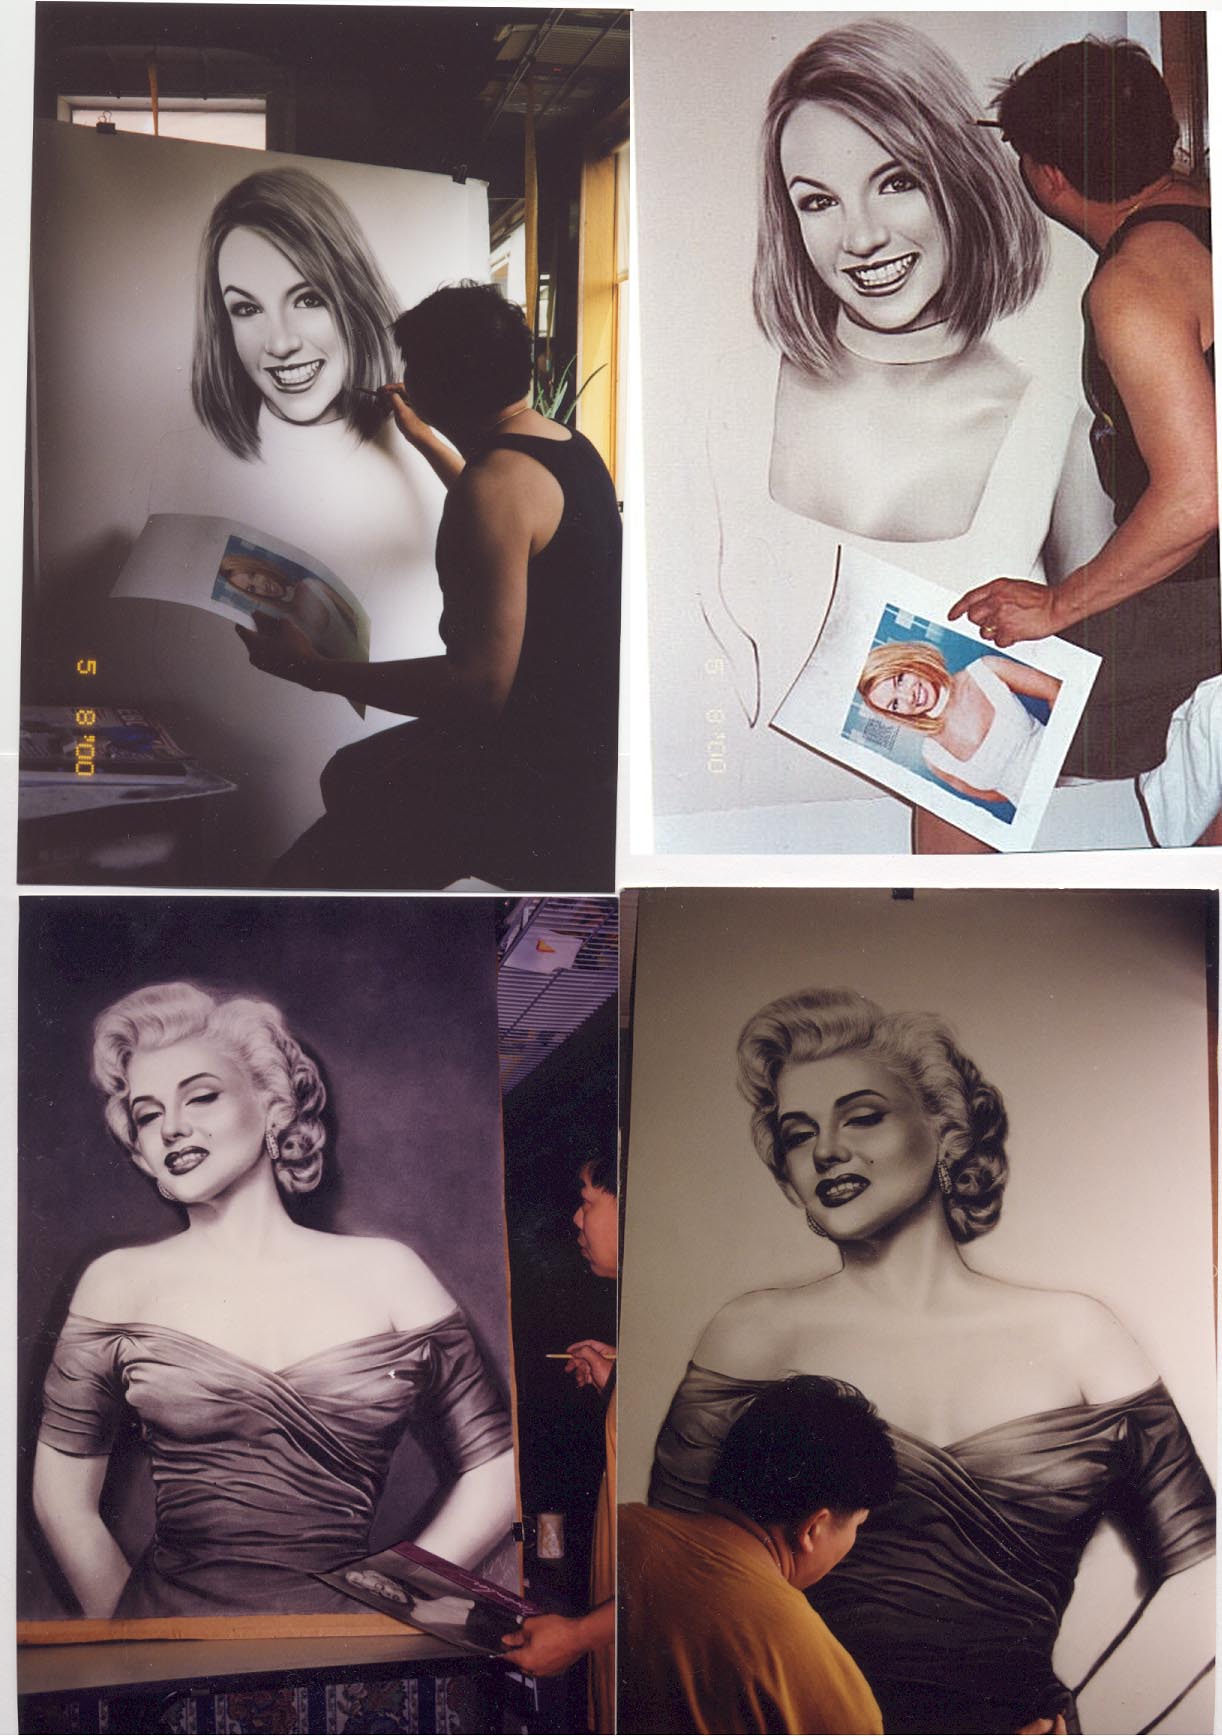 Britney Spears and Marylin Monroe